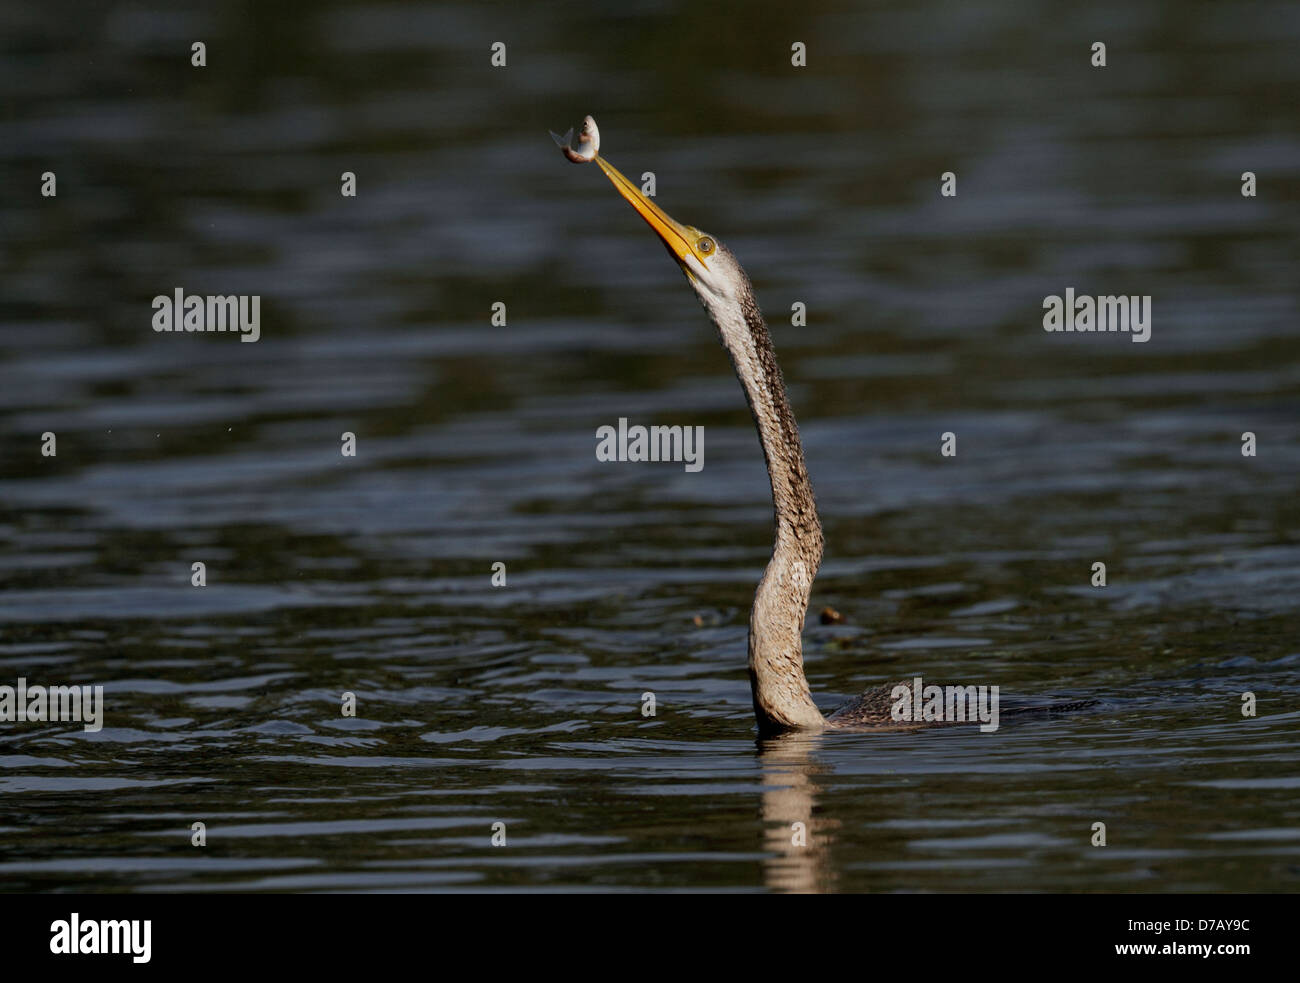 Darter catching fish in Keoladeo National Park, Rajasthan, India Stock Photo